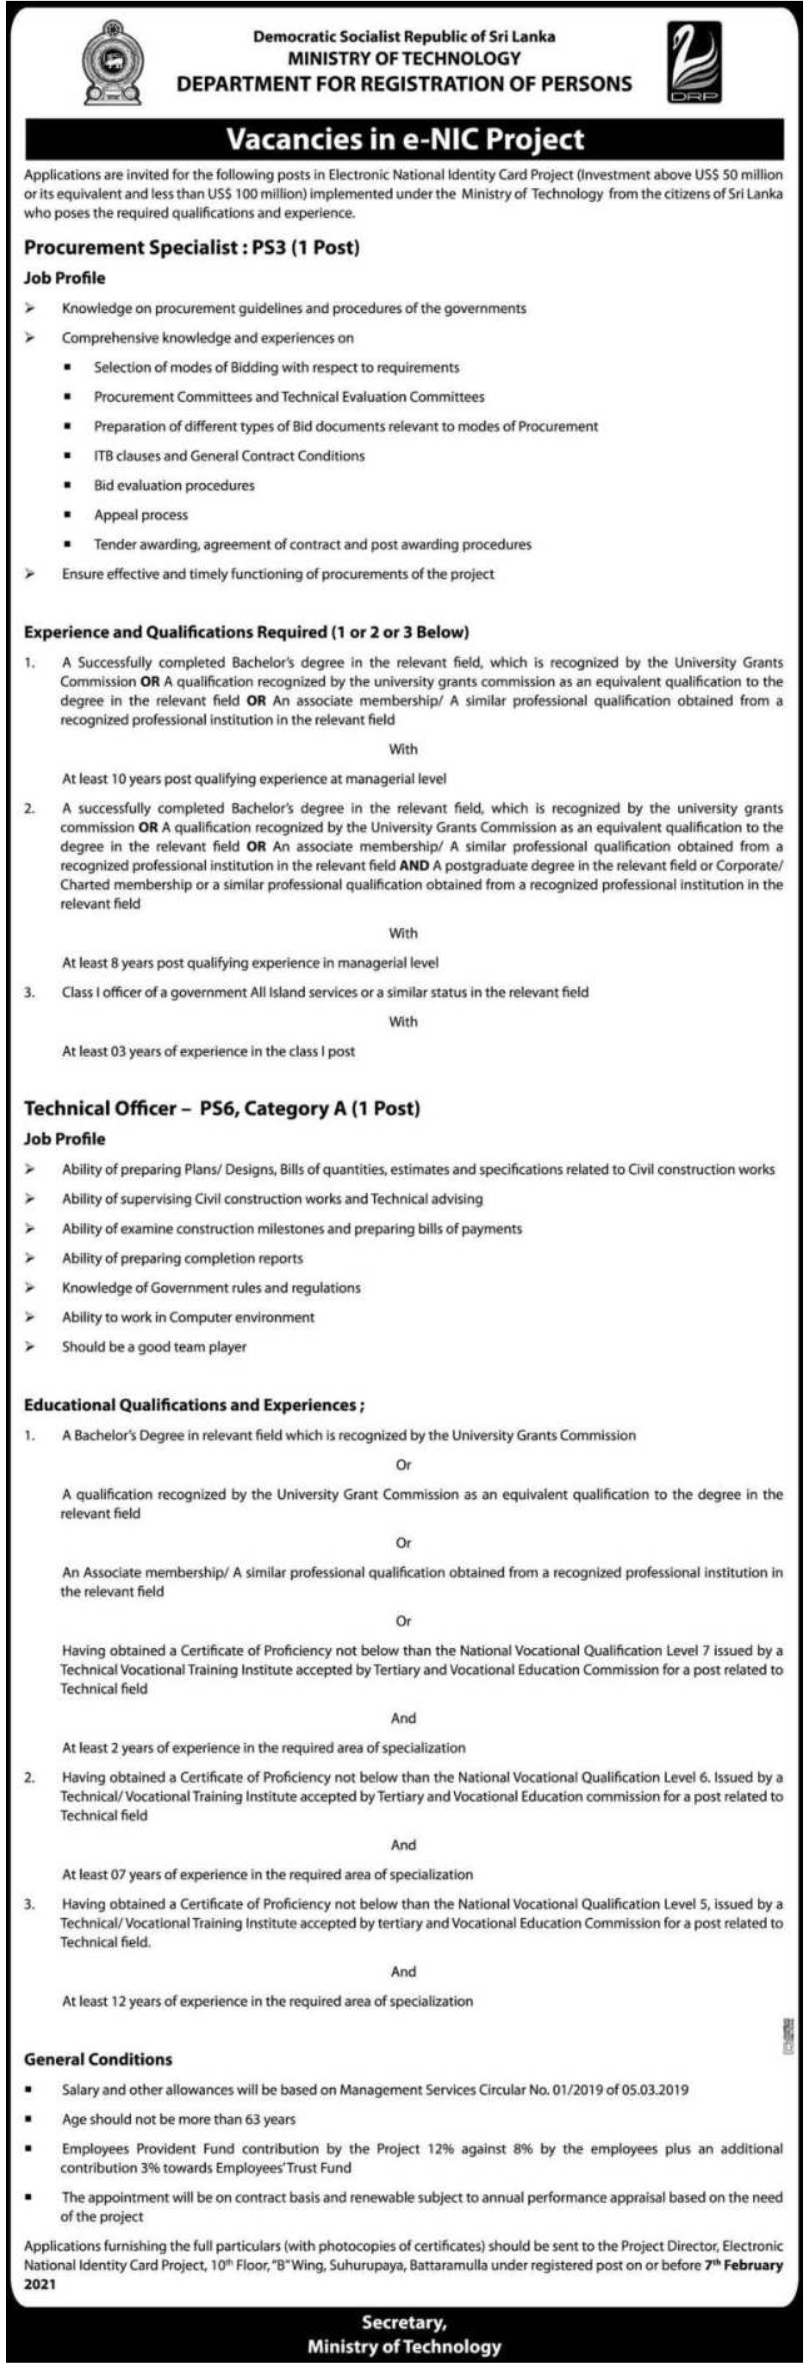 Technical Officer, Procurement Specialist – Electronic National Identity Card (e-NIC) Project